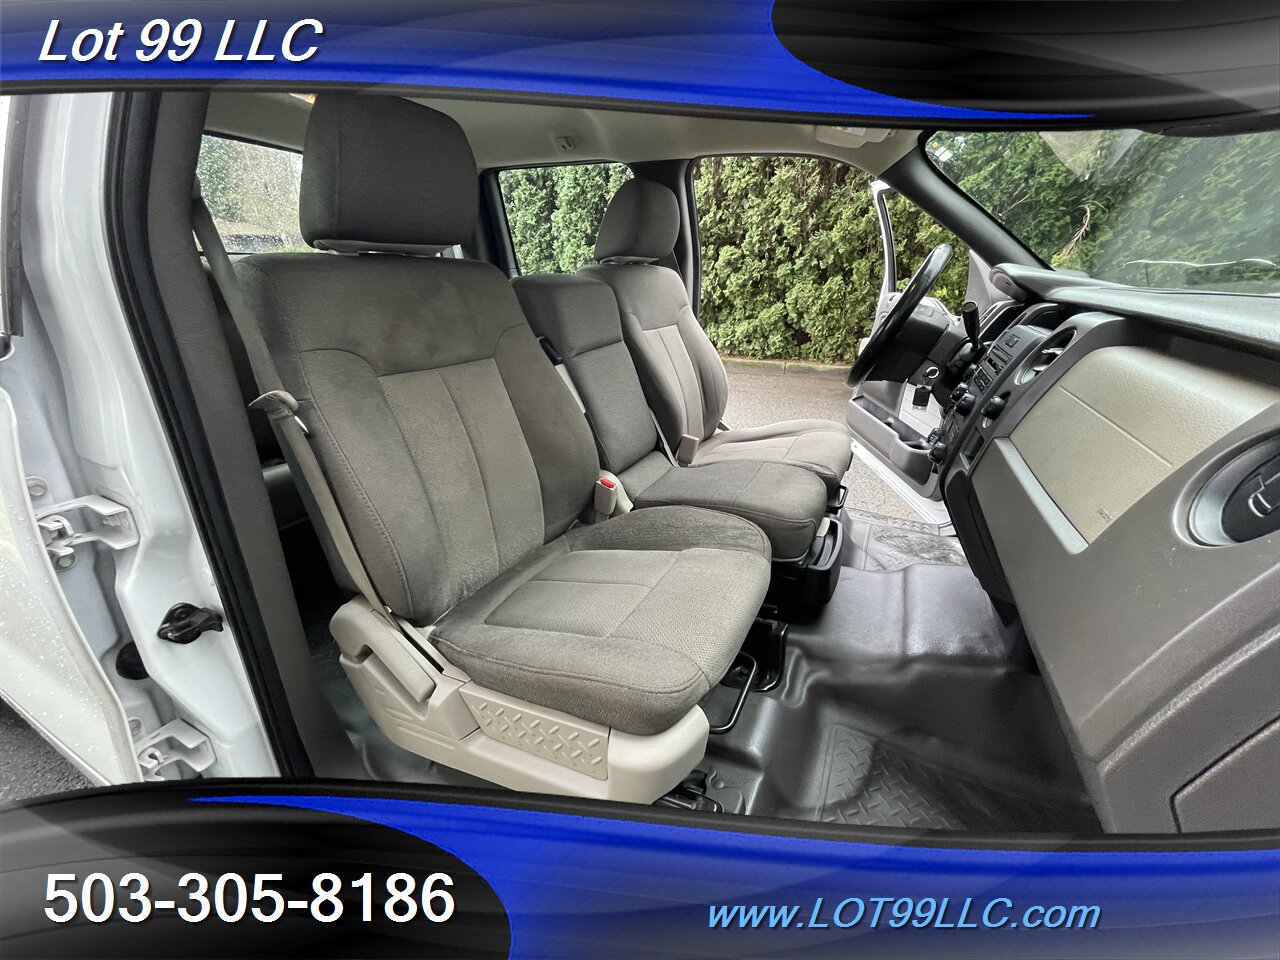 2010 Ford F-150 XL SuperCrew 4x4 6.5 Bed  4.6L 3V V8 292hp   - Photo 16 - Milwaukie, OR 97267